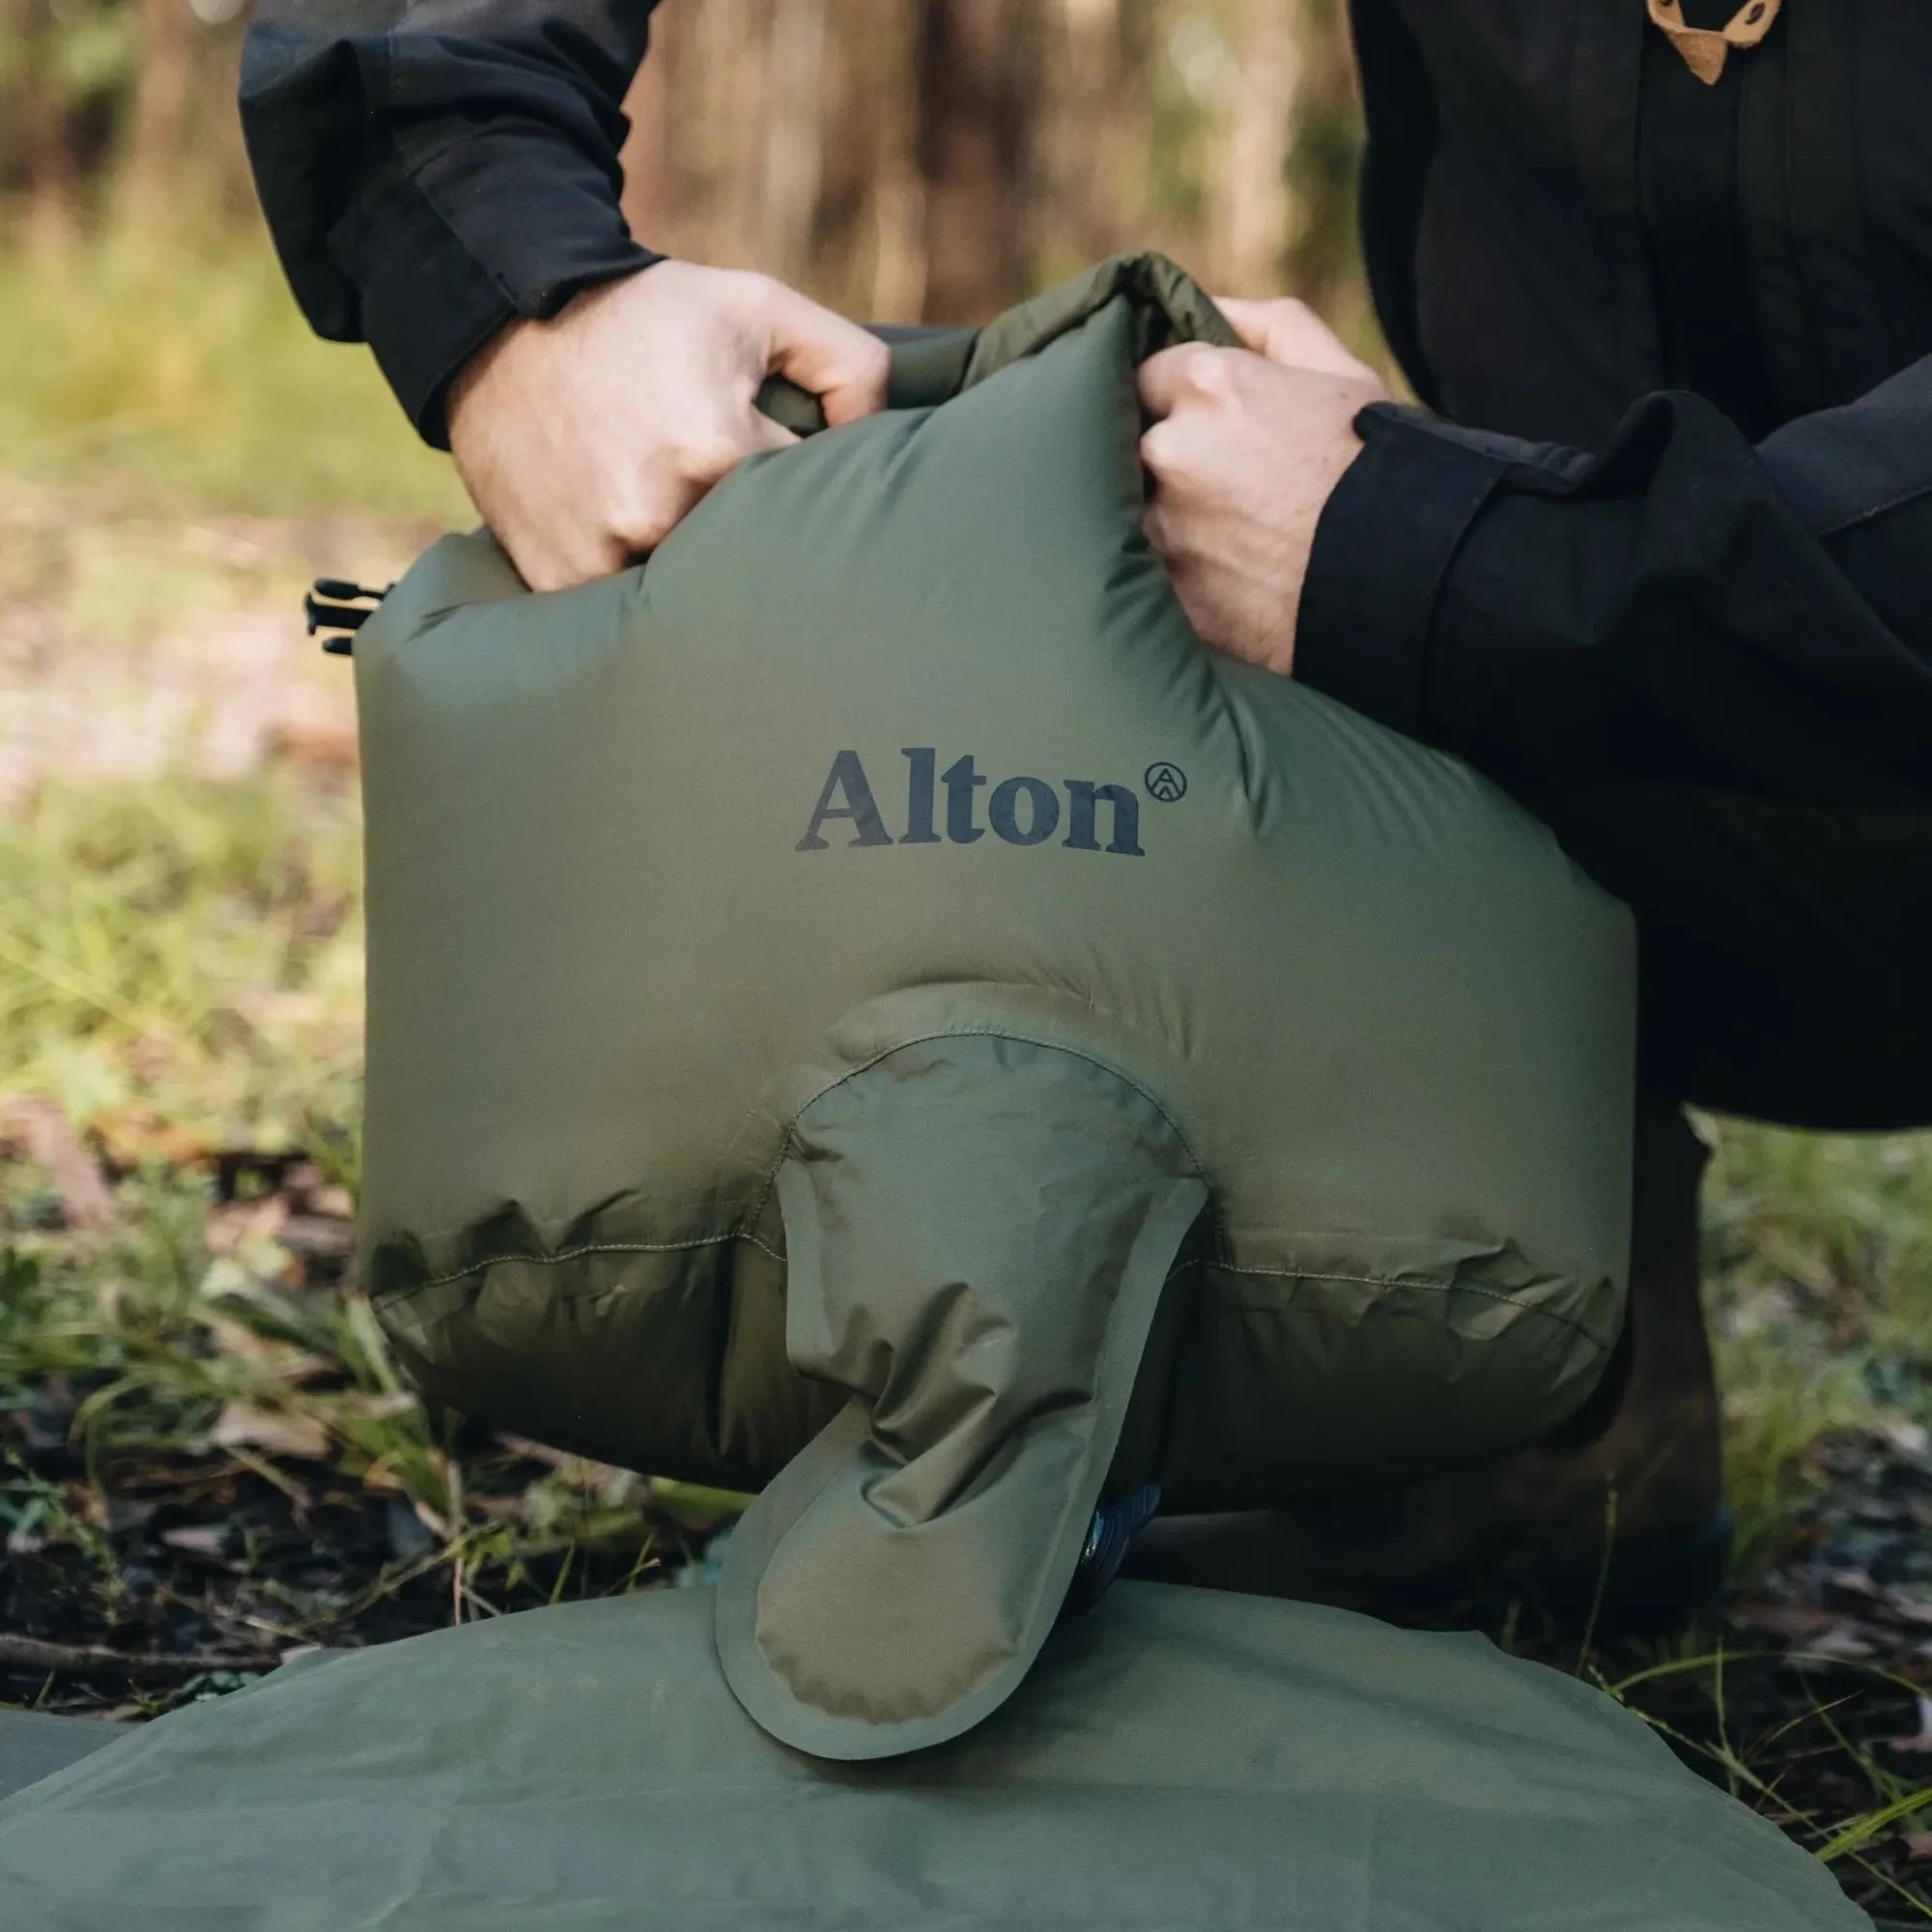 Front view of Alton Goods Ultralight Pump Bag being used to inflate mattress